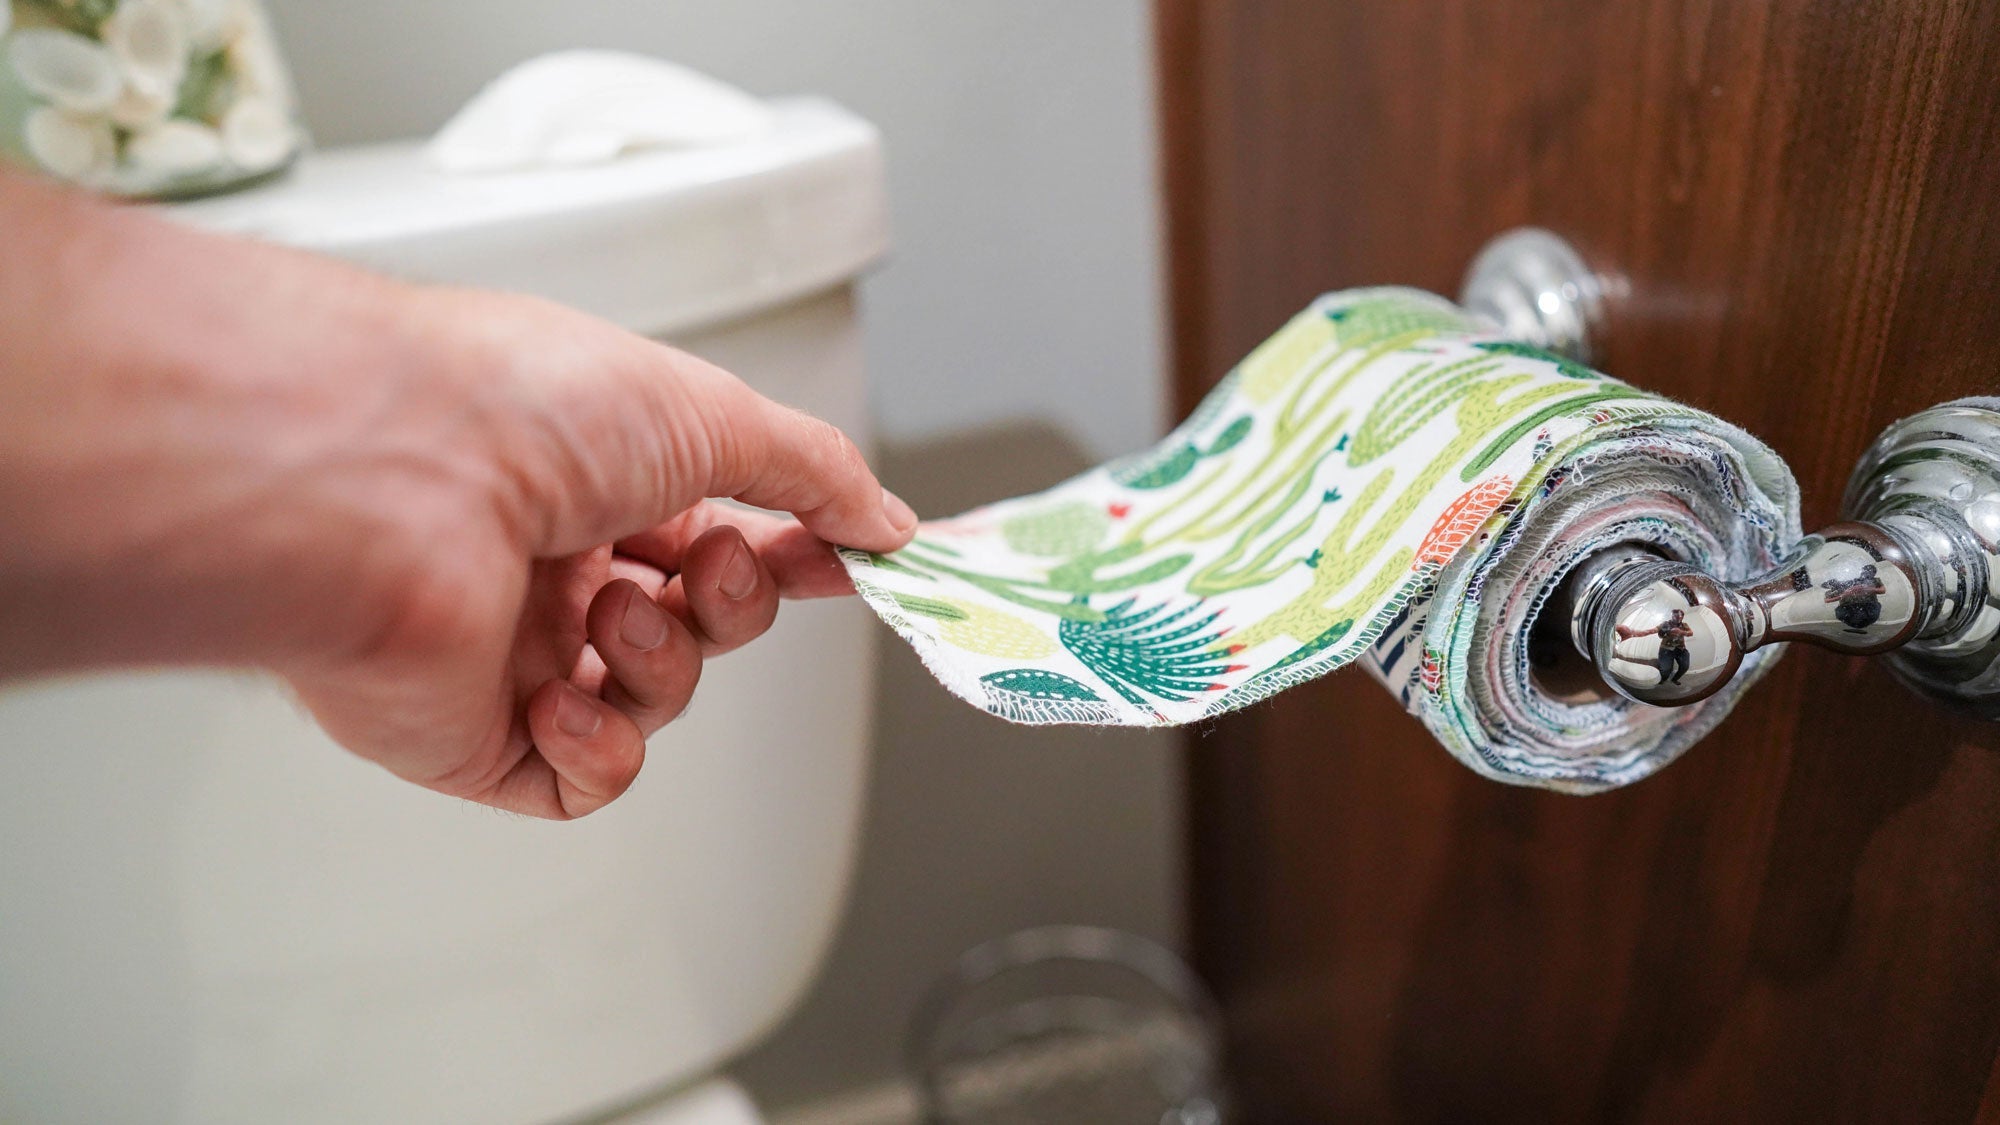 How to care for Toilet UNpaper® - Marley's Monsters